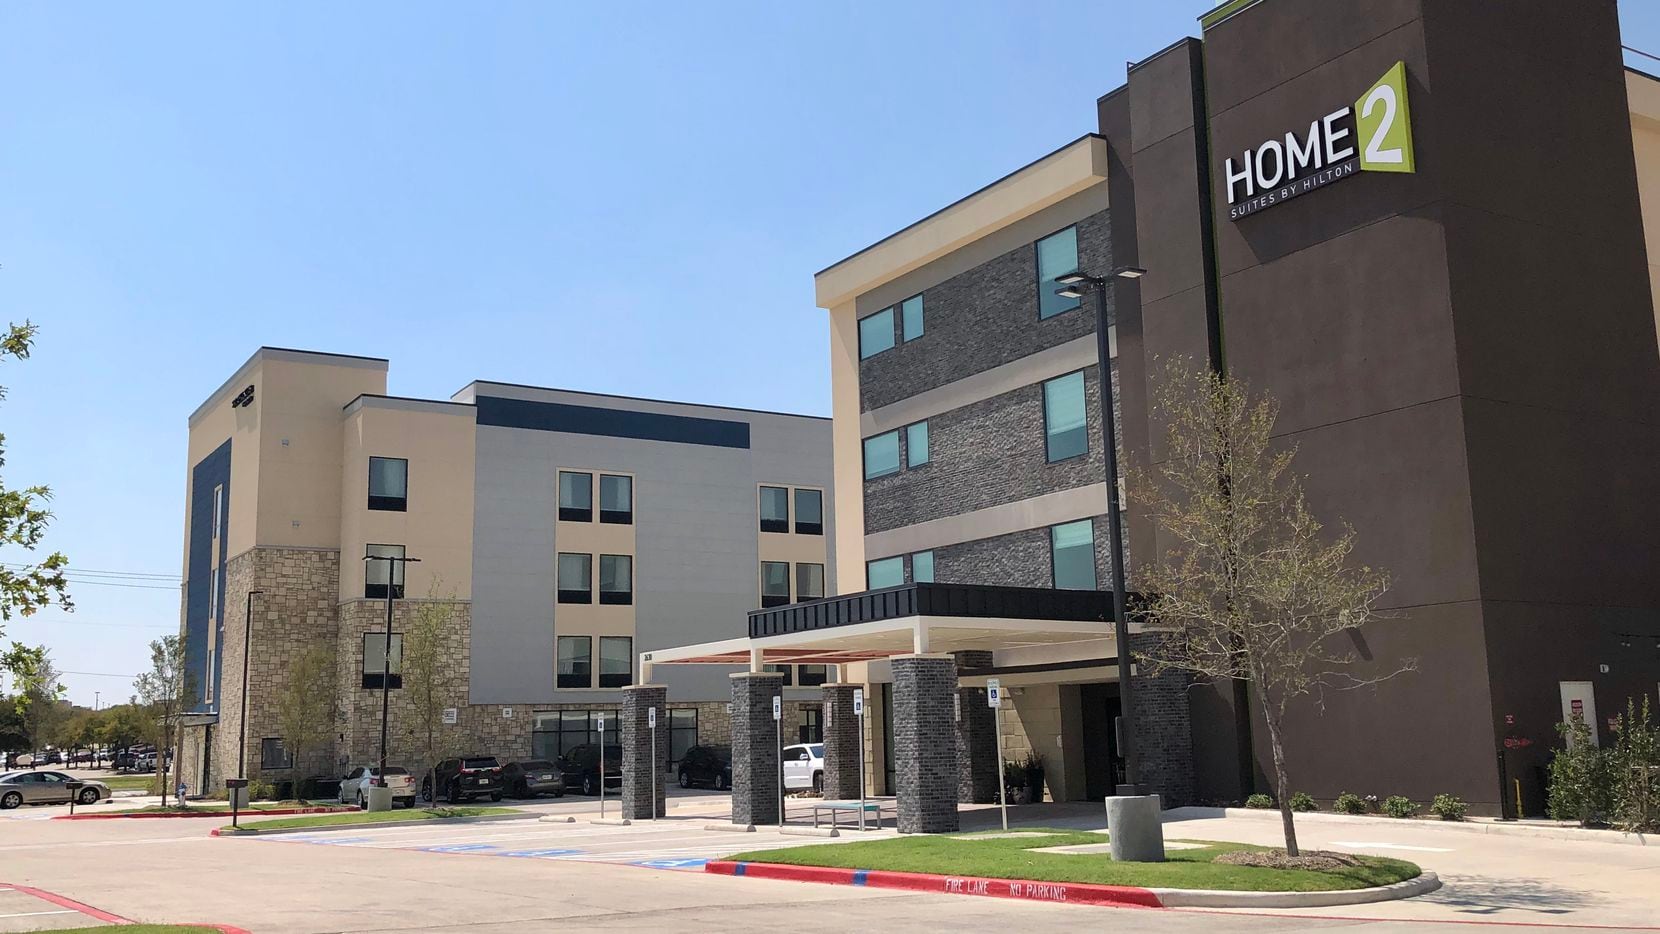 The SpringHill Suites and Home 2 Hilton hotels are on U.S. Highway 75.